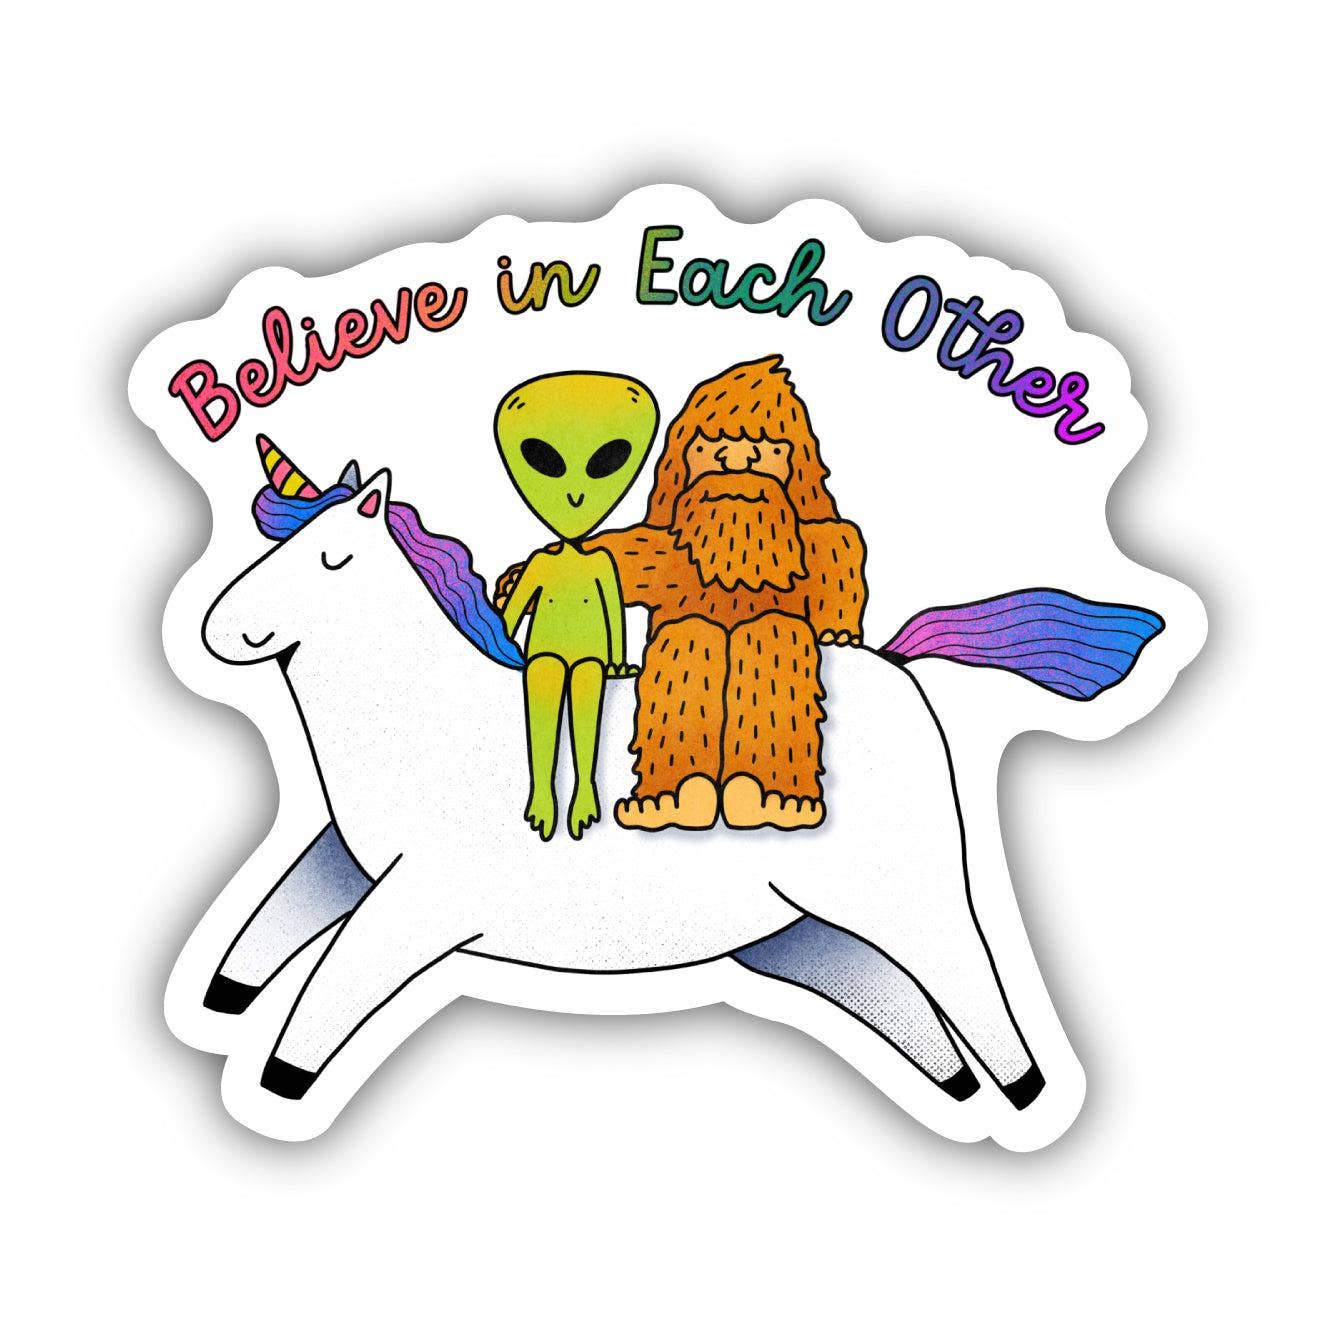 "Believe In Each Other" Mythical Creatures Sticker